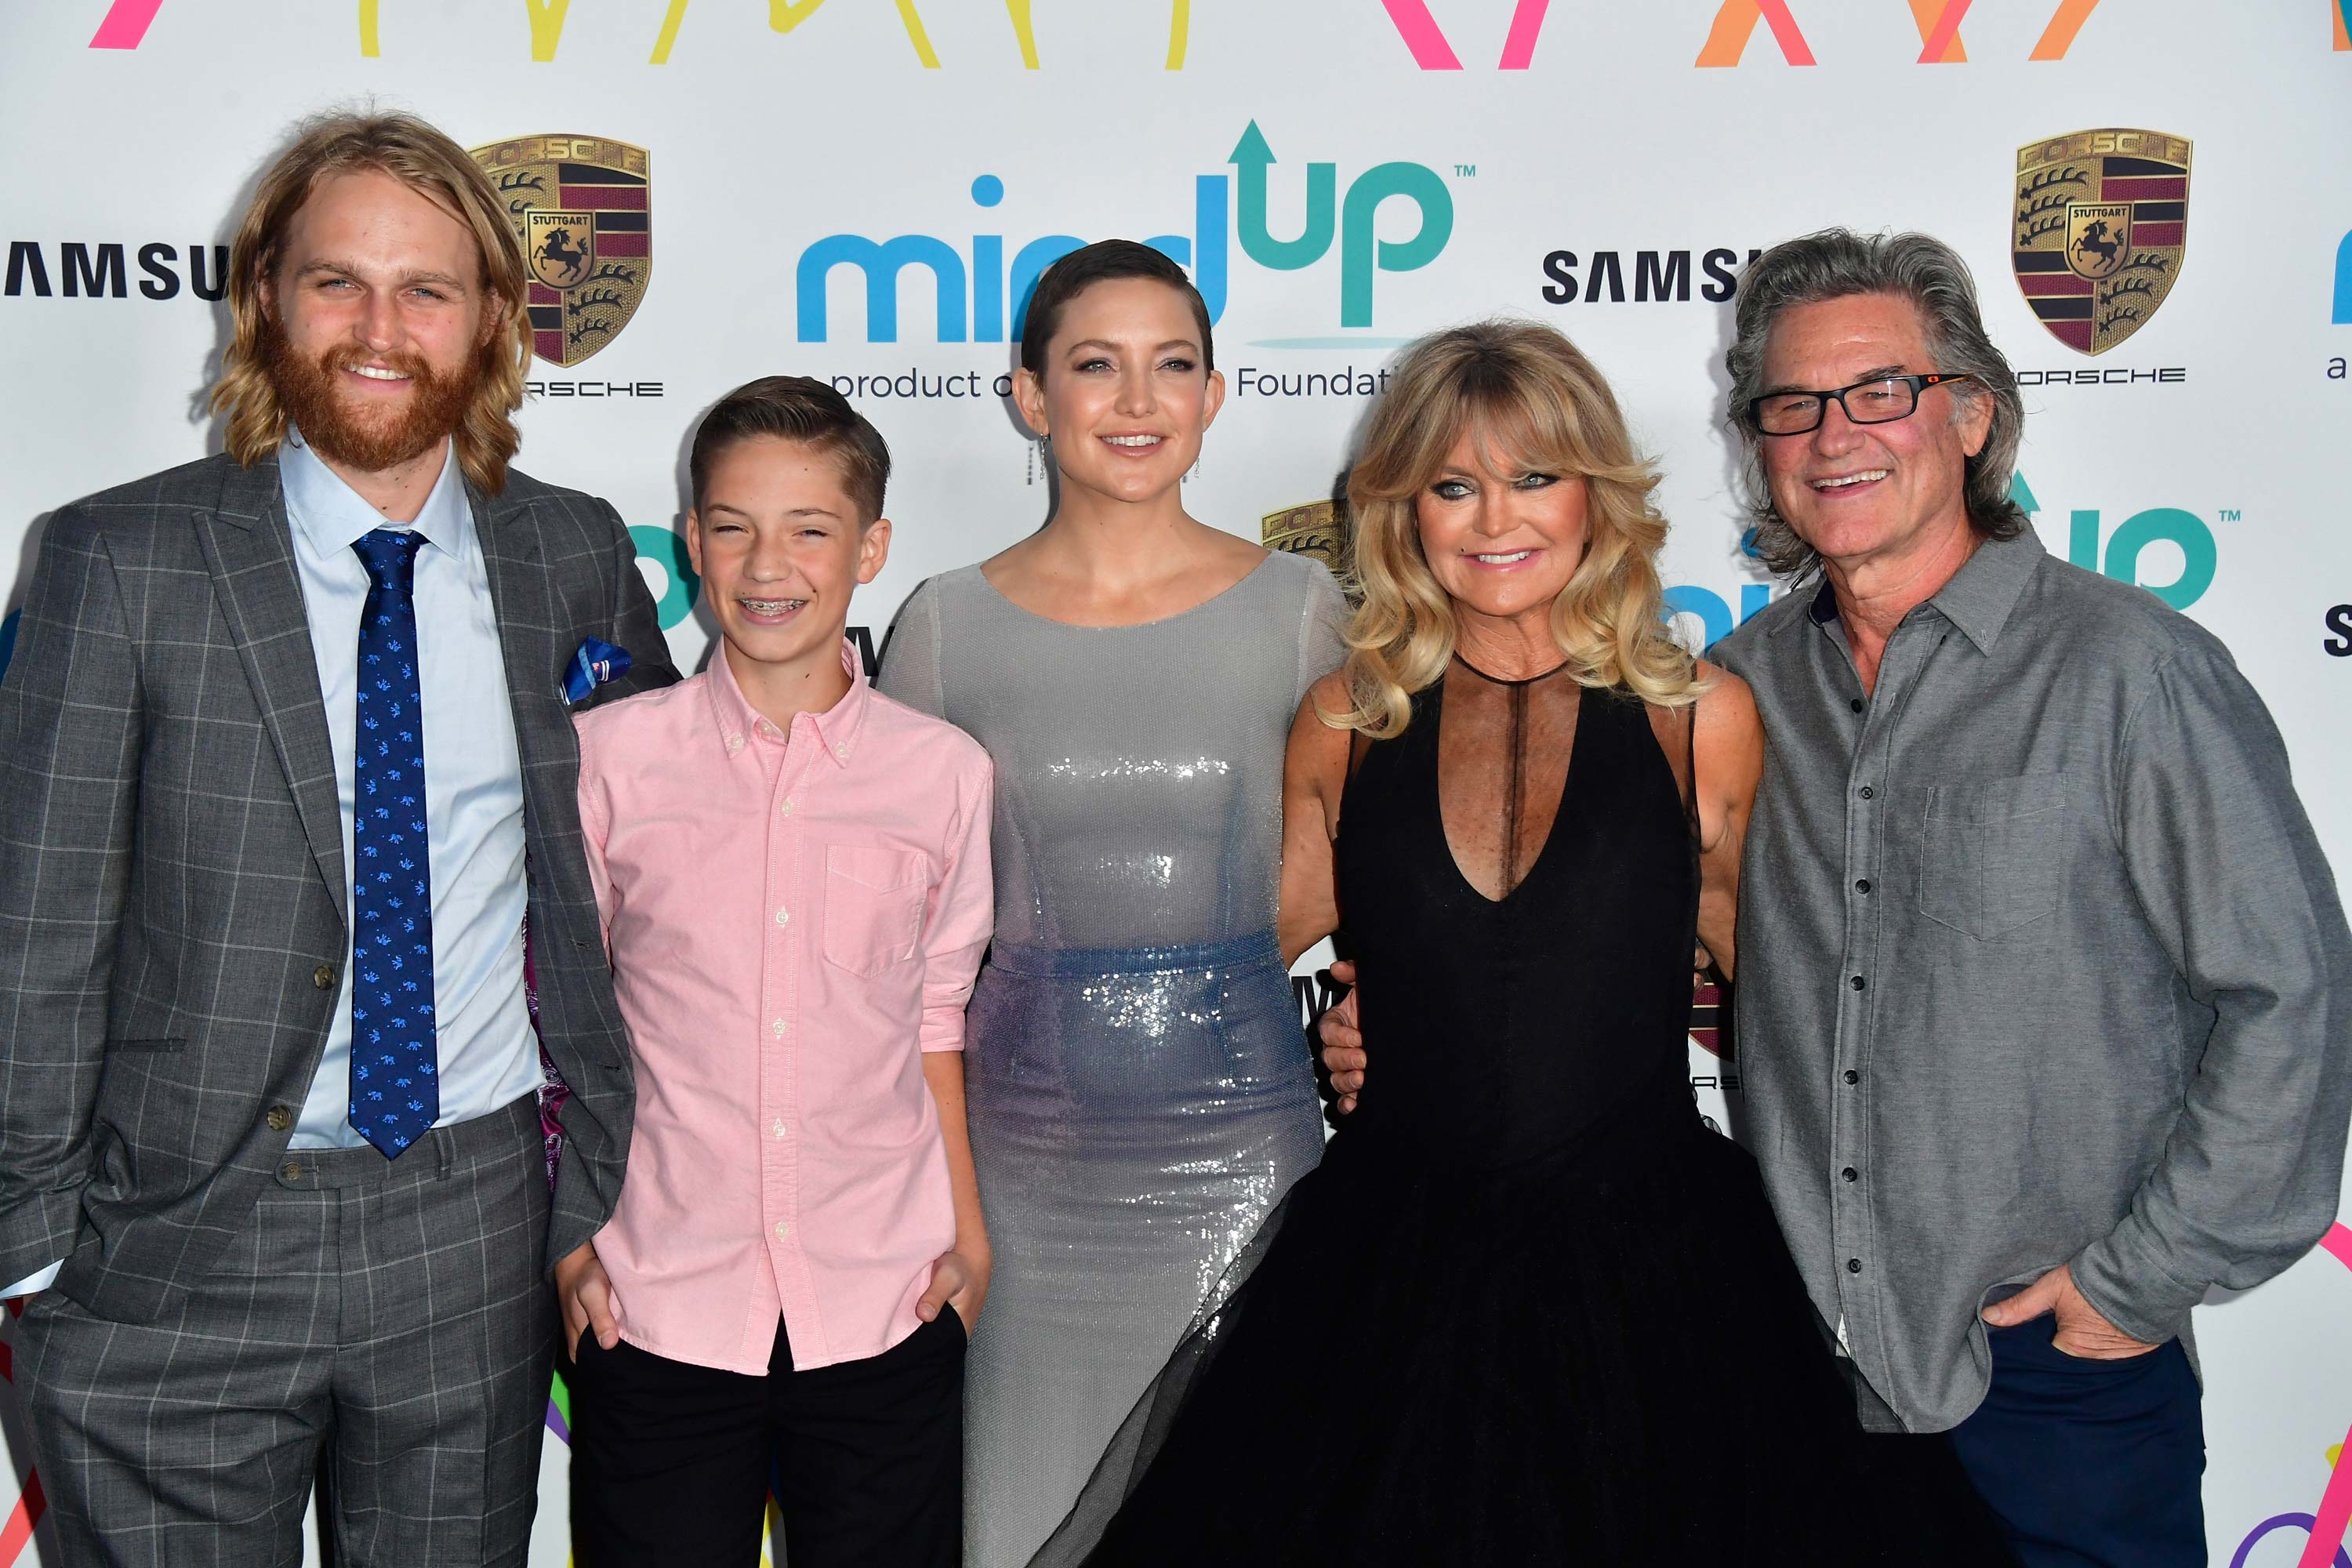 Wyatt Russell, Kate Hudson, Ryder Robinson, Goldie Hawn and Kurt Russell at Goldie Hawn's Goldie���s Love in For Kids event